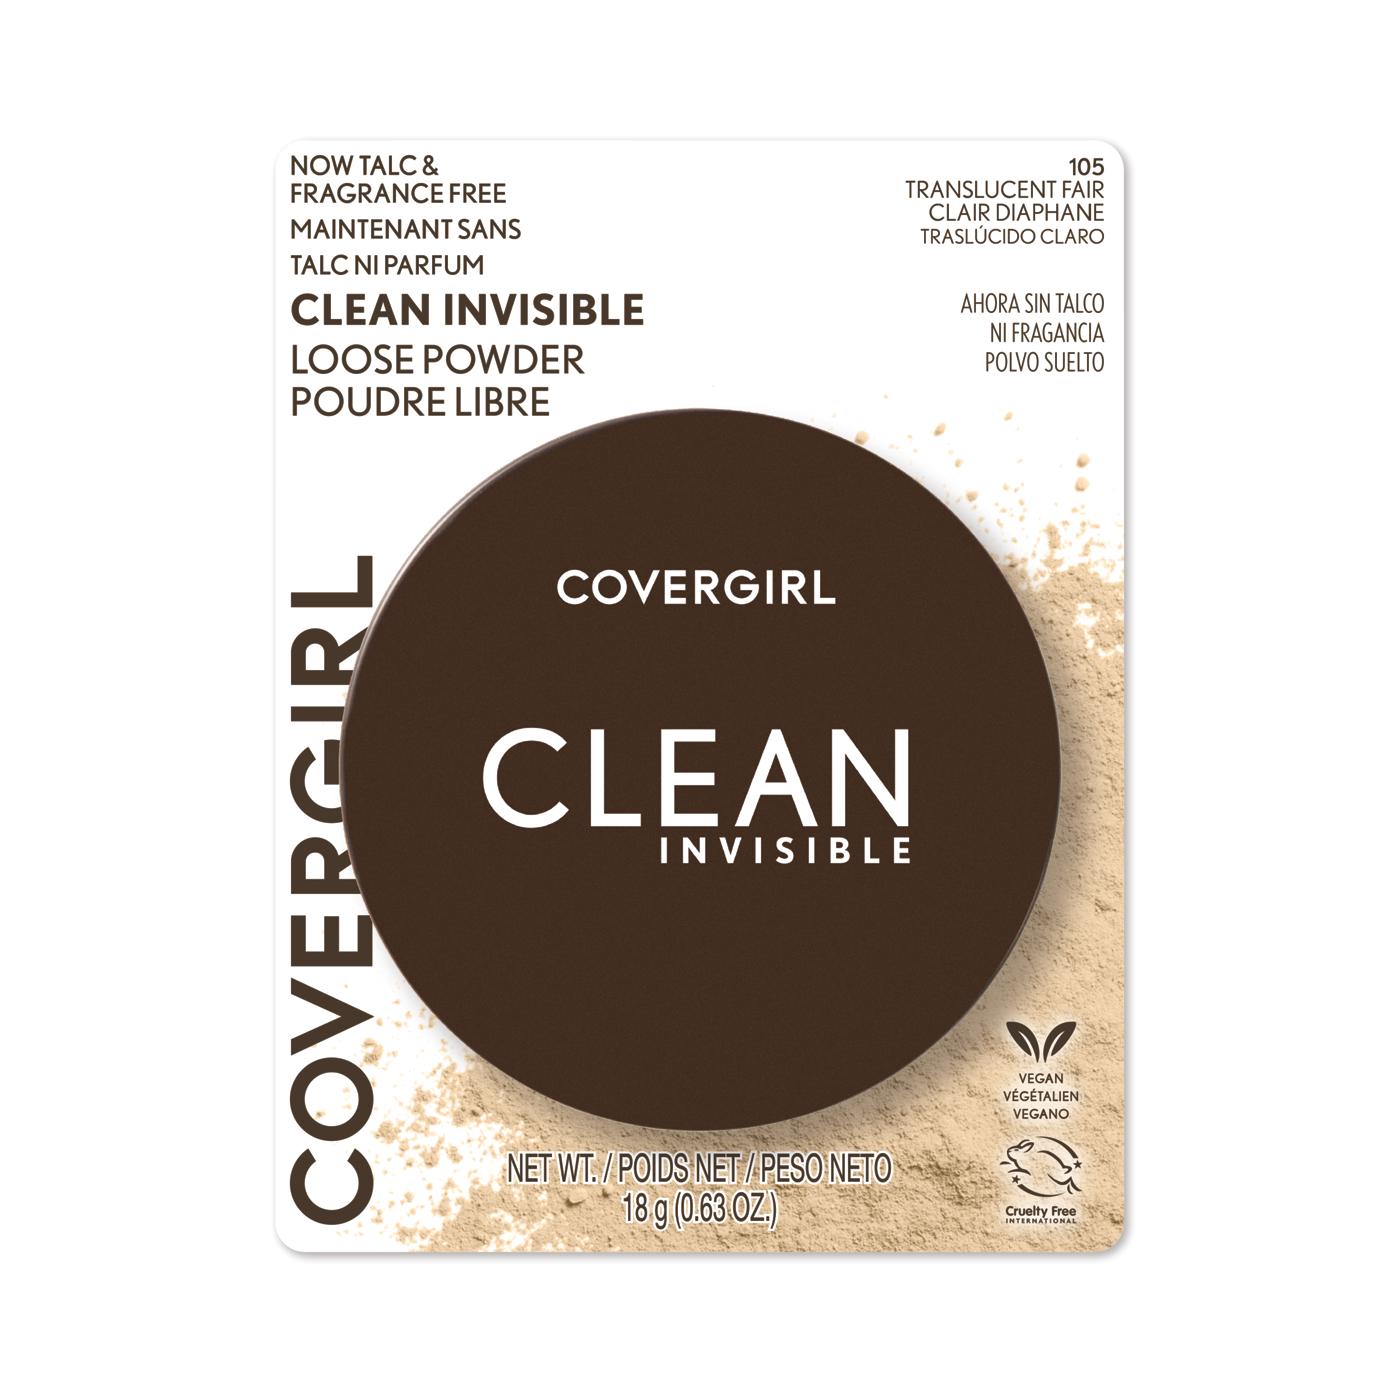 Covergirl Clean Invisible Loose Powder - Translucent Fair; image 1 of 13